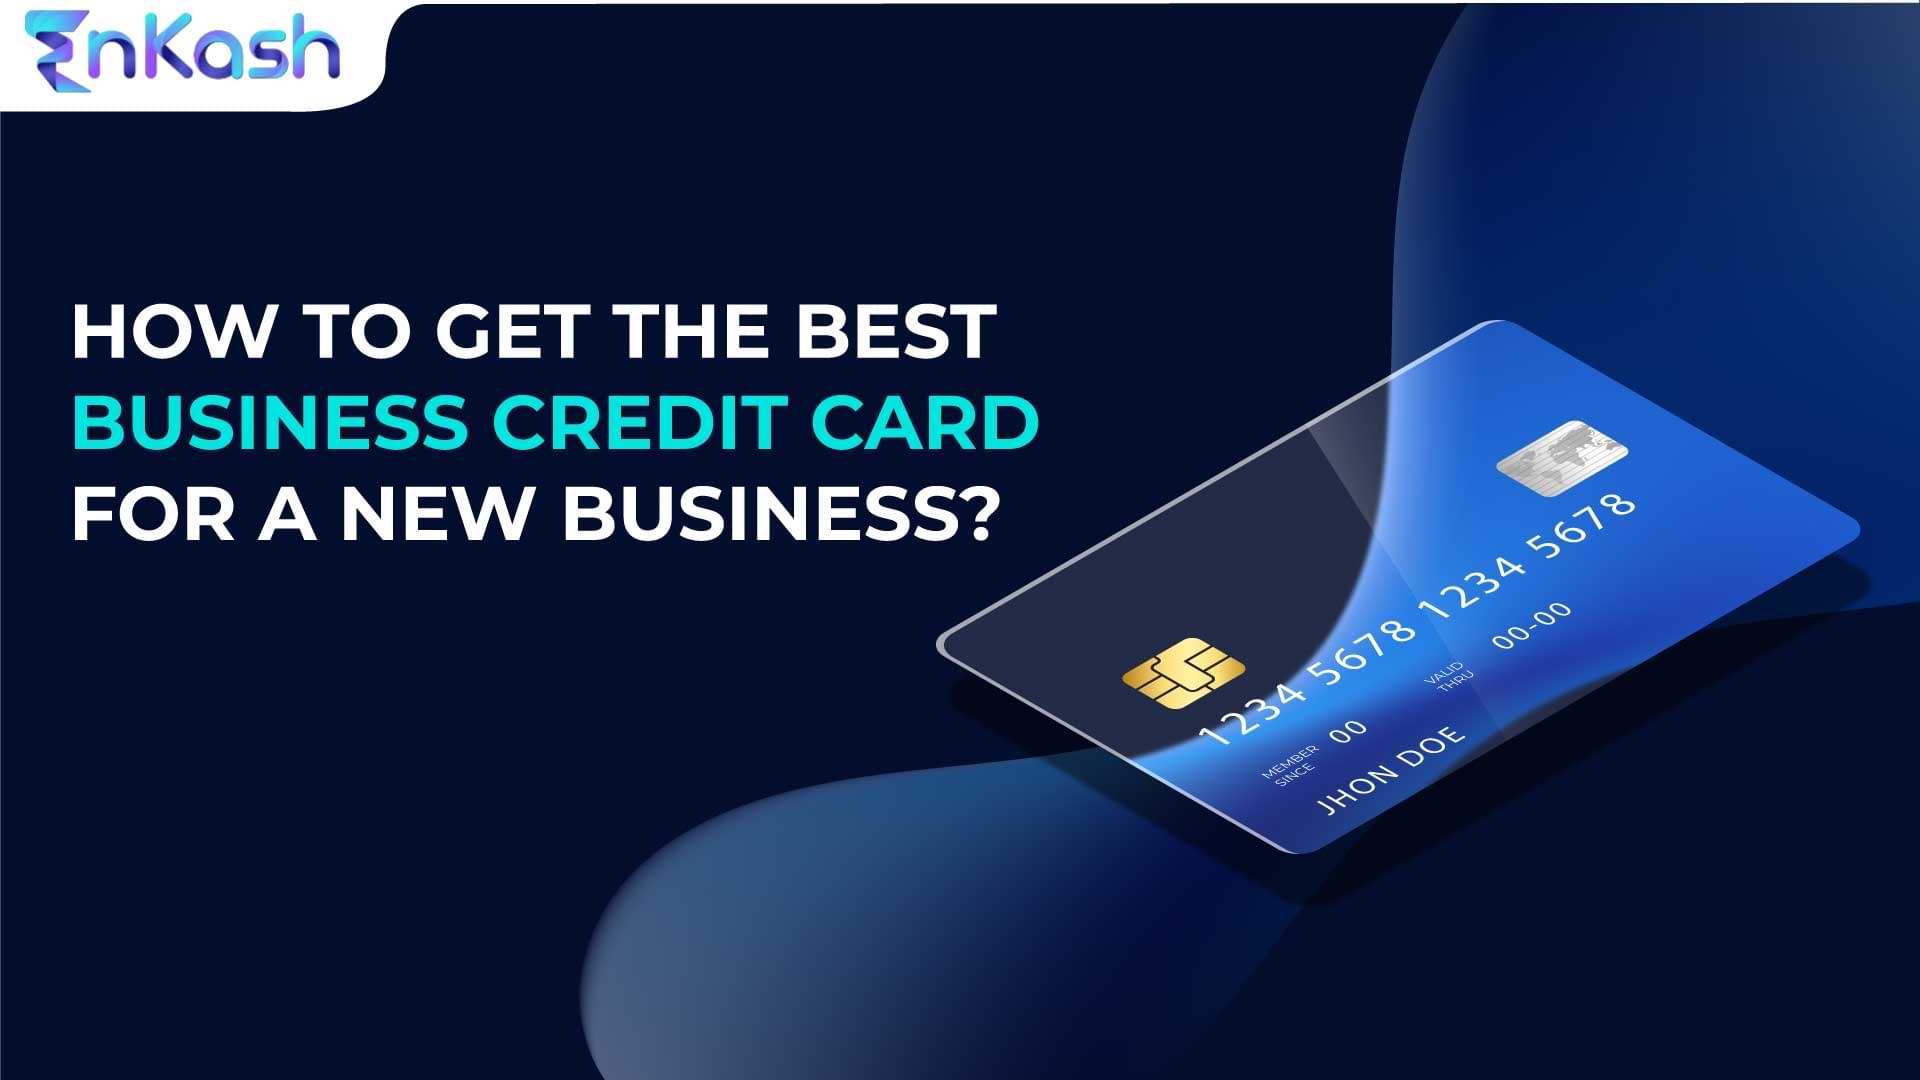 How to get the best business credit card for new business